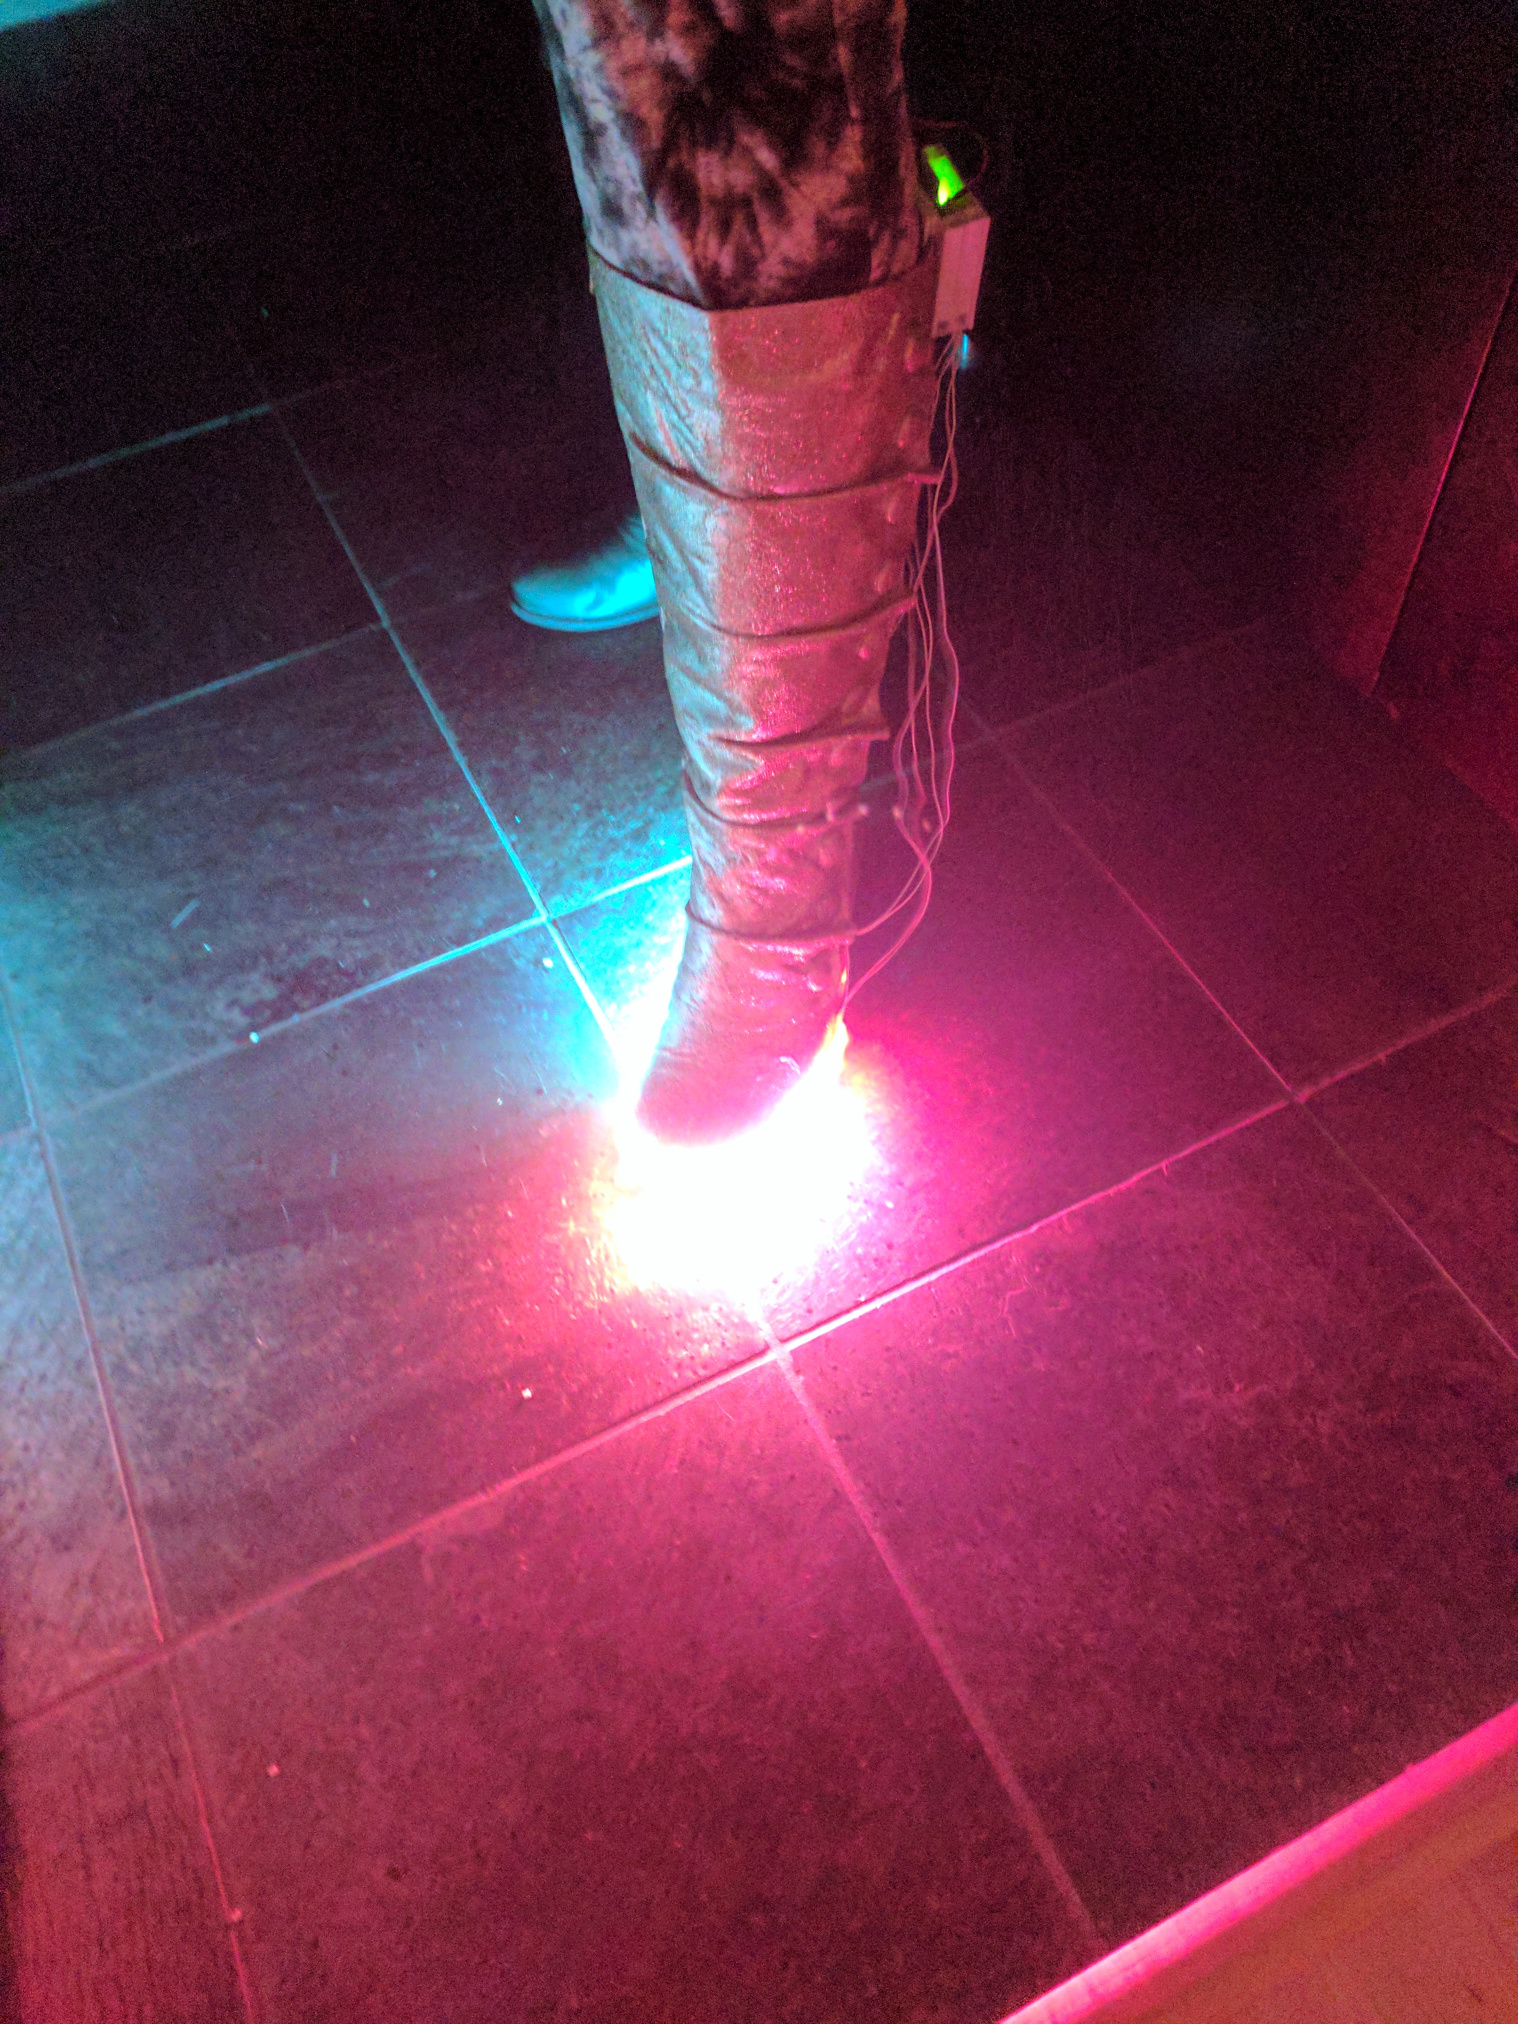 A leg, wearing a gold glitter covered calf high boot with LEDs along the base and a home made electronics enclosure on the back.  Wires hang loose.  The LEDs glow pink.